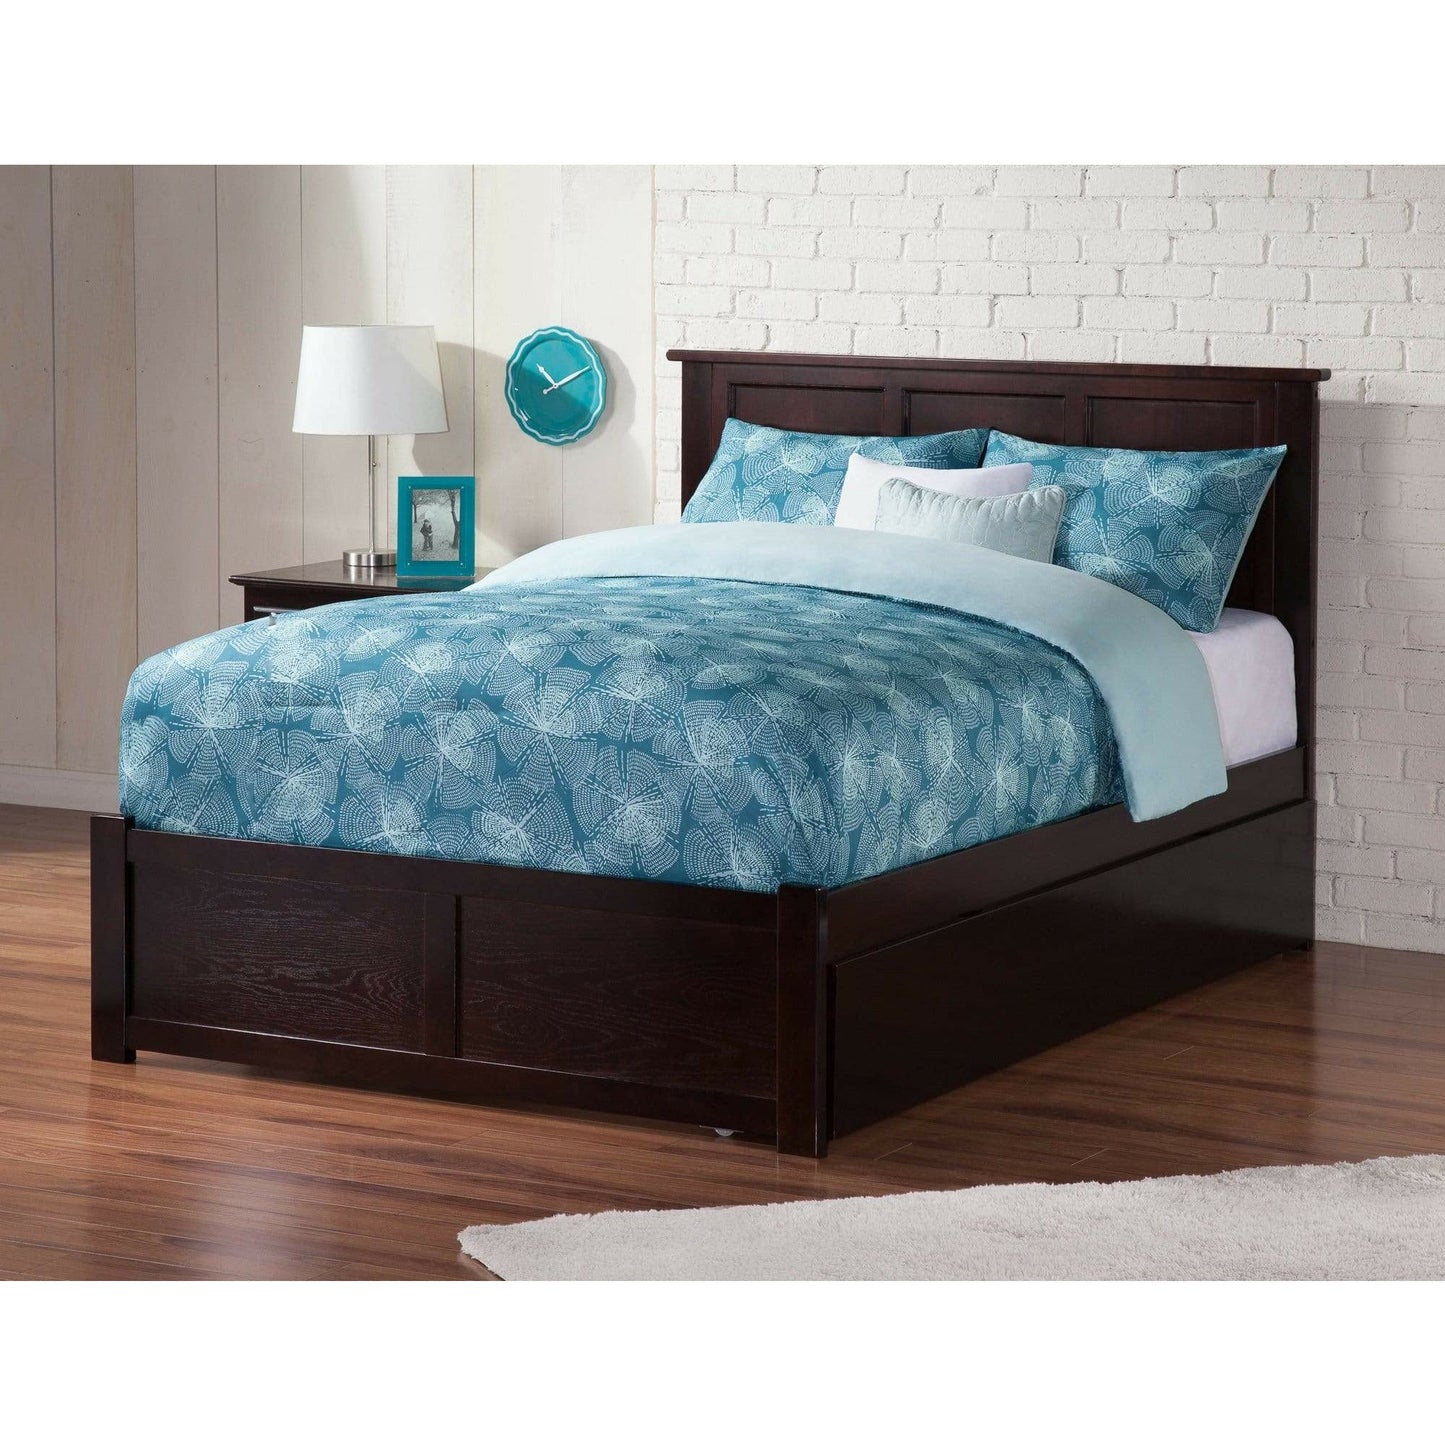 Atlantic Furniture Bed Madison Full Platform Bed with Flat Panel Foot Board and Full Size Urban Trundle Bed in Espresso